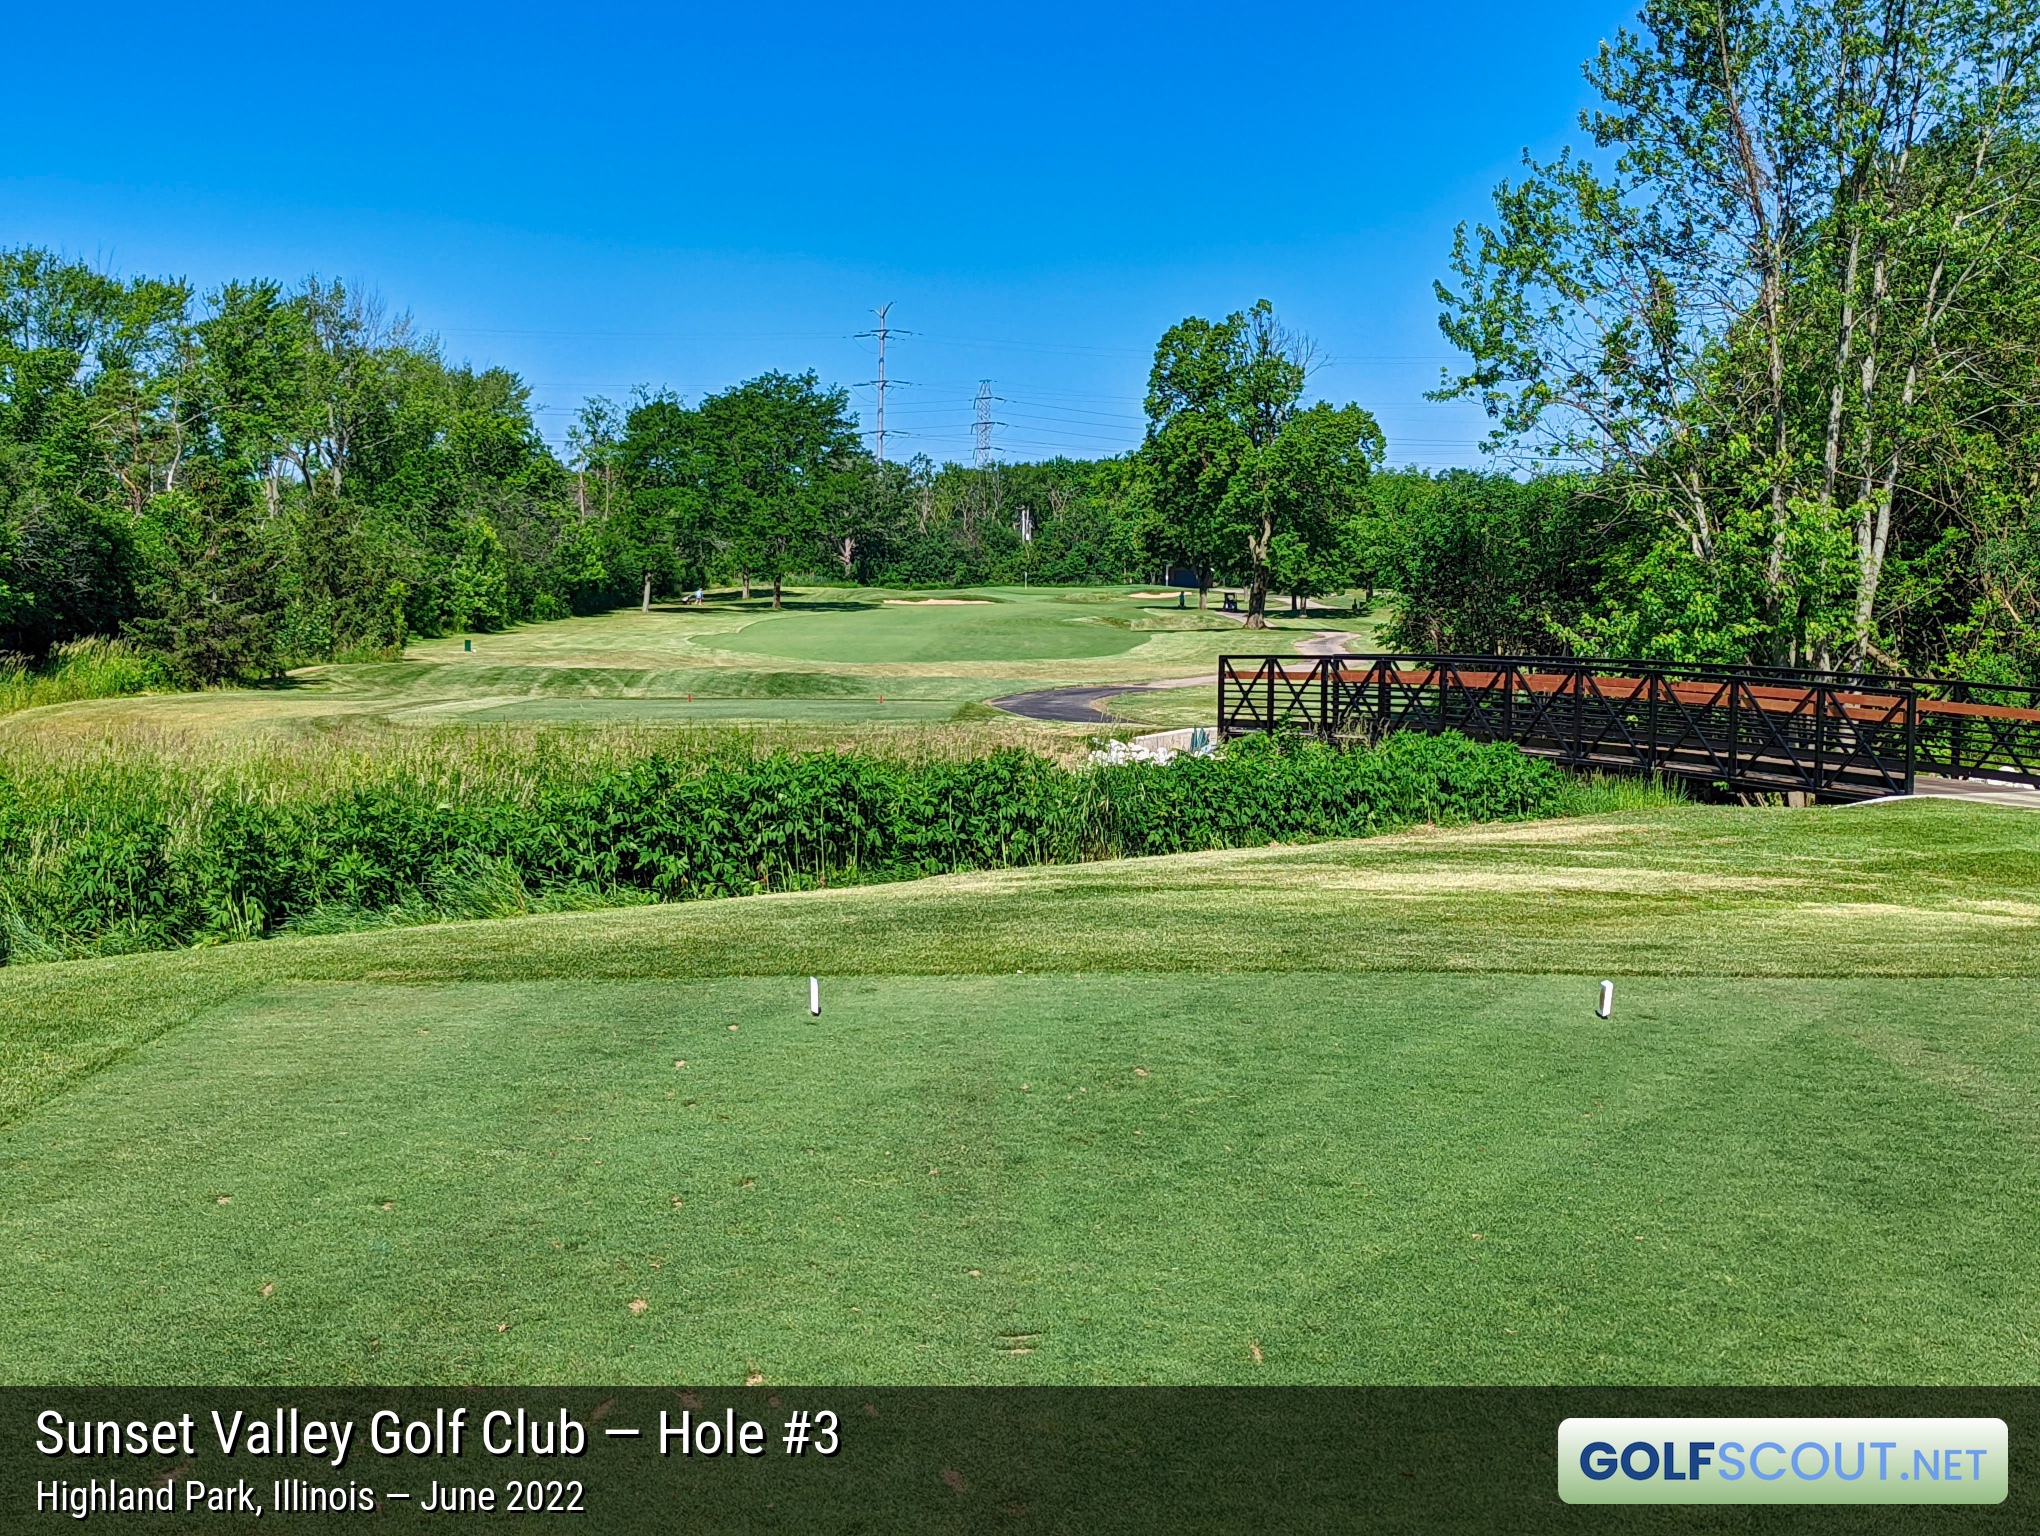 Photo of hole #3 at Sunset Valley Golf Club in Highland Park, Illinois. 